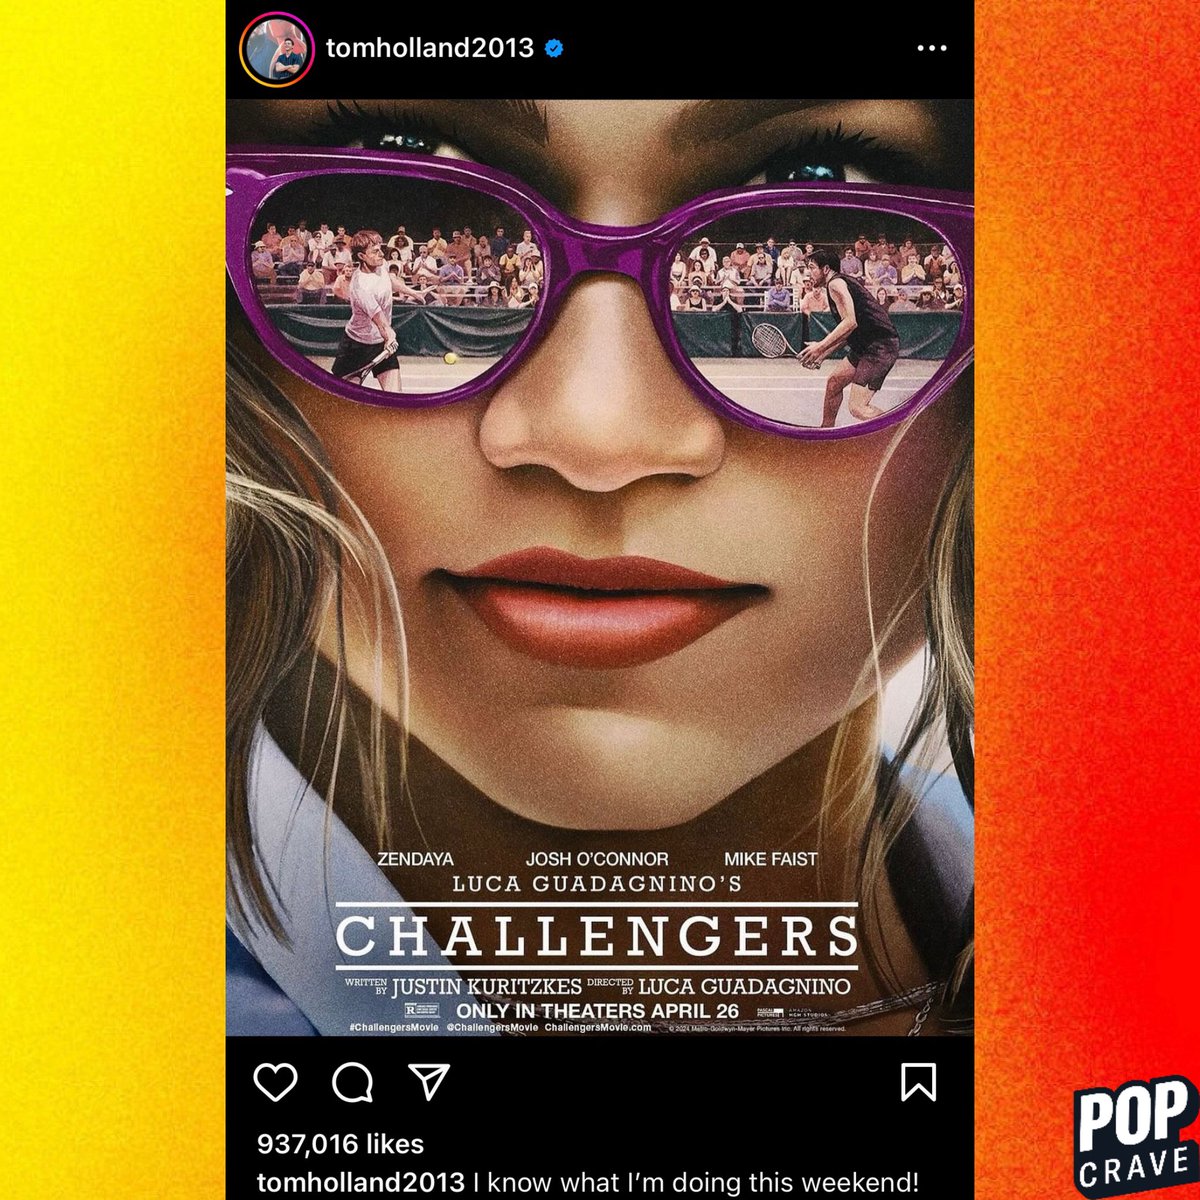 Tom Holland shows support for ‘Challengers’ starring Zendaya in new post: “I know what I’m doing this weekend!”